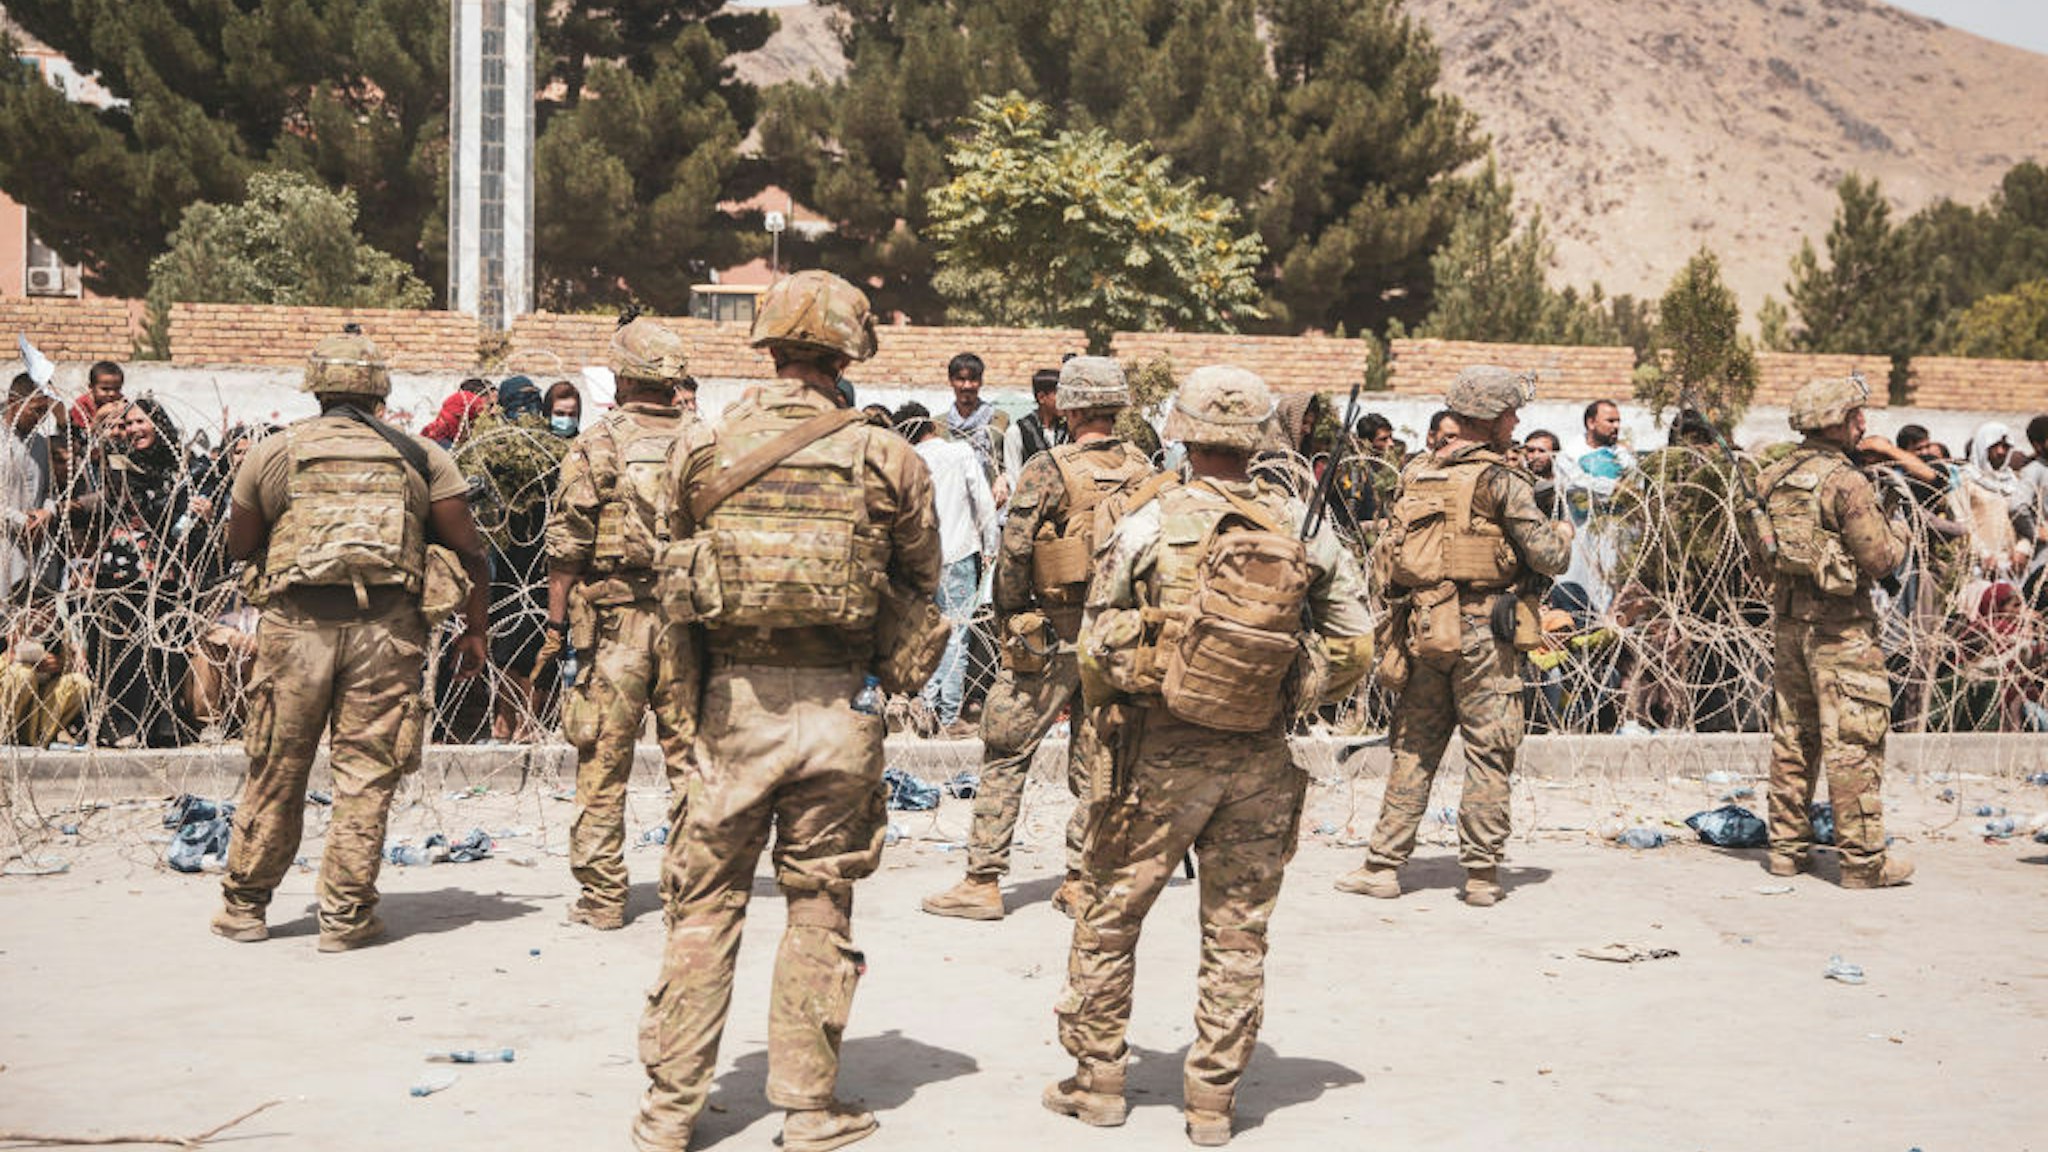 HAMID KARZAI INTERNATIONAL AIRPORT, AFGHANISTAN - AUGUST 19: This handout image shows U.S. Soldiers and Marines assist with security at an Evacuation Control Checkpoint during an evacuation at Hamid Karzai International Airport, August 19, 2021 in Kabul, Afghanistan. U.S. service members are assisting the Department of State with a non-combatant evacuation operation (NEO) in Afghanistan.